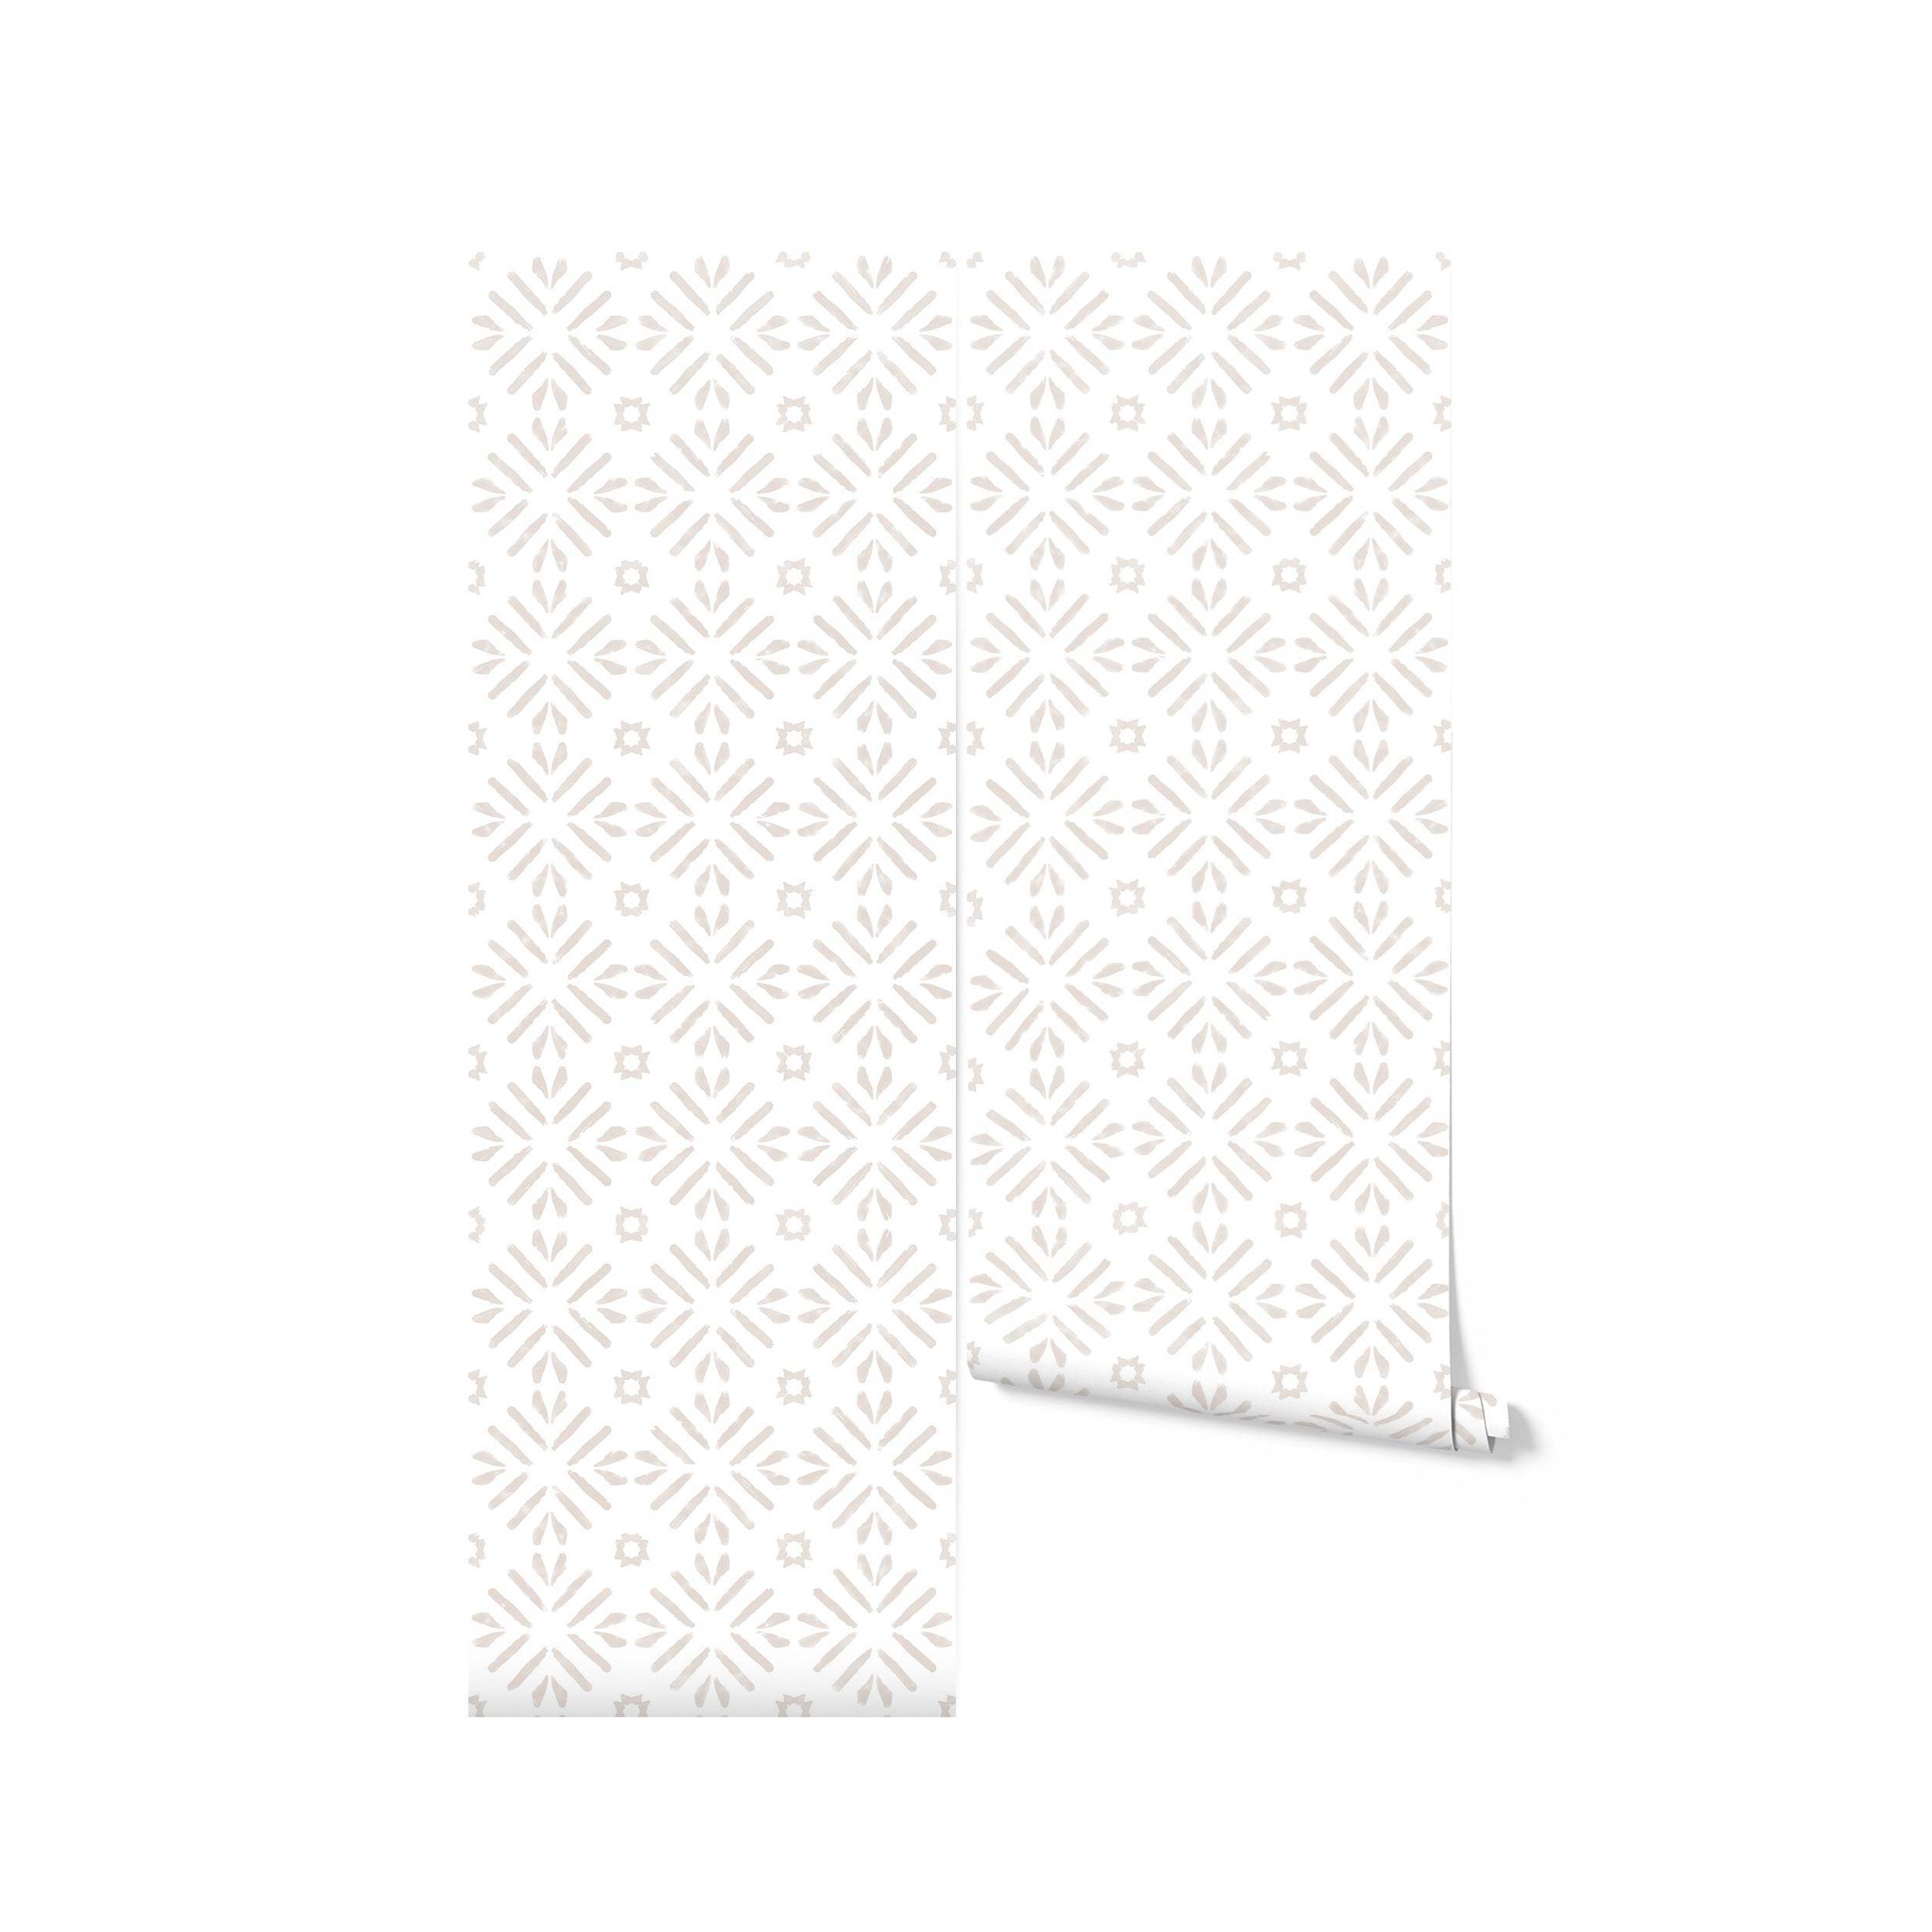 A roll of 'Geometric Watercolour Wallpaper' leans against a white background, with a portion unrolled to show off the delicate beige geometric pattern. The watercolor effect adds a soft, textured look, suggesting a sophisticated yet understated backdrop for various interior styles.